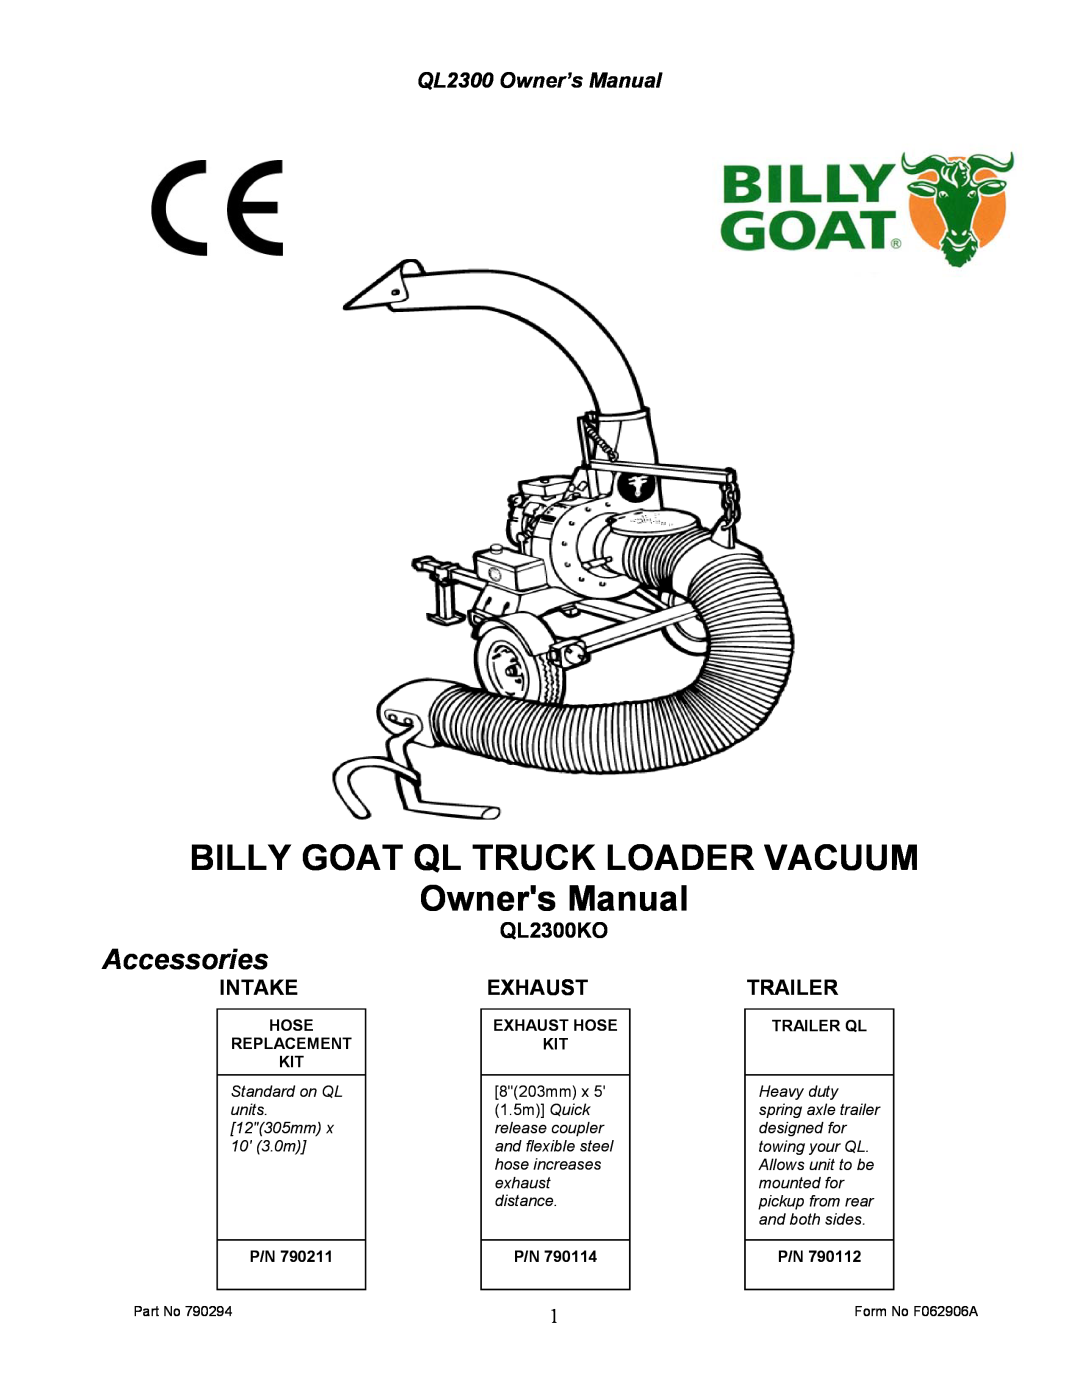 Billy Goat QL2300KO owner manual QL2300 Owner’s Manual, Intake, Exhaust, Trailer, Accessories, Hose Replacement Kit 